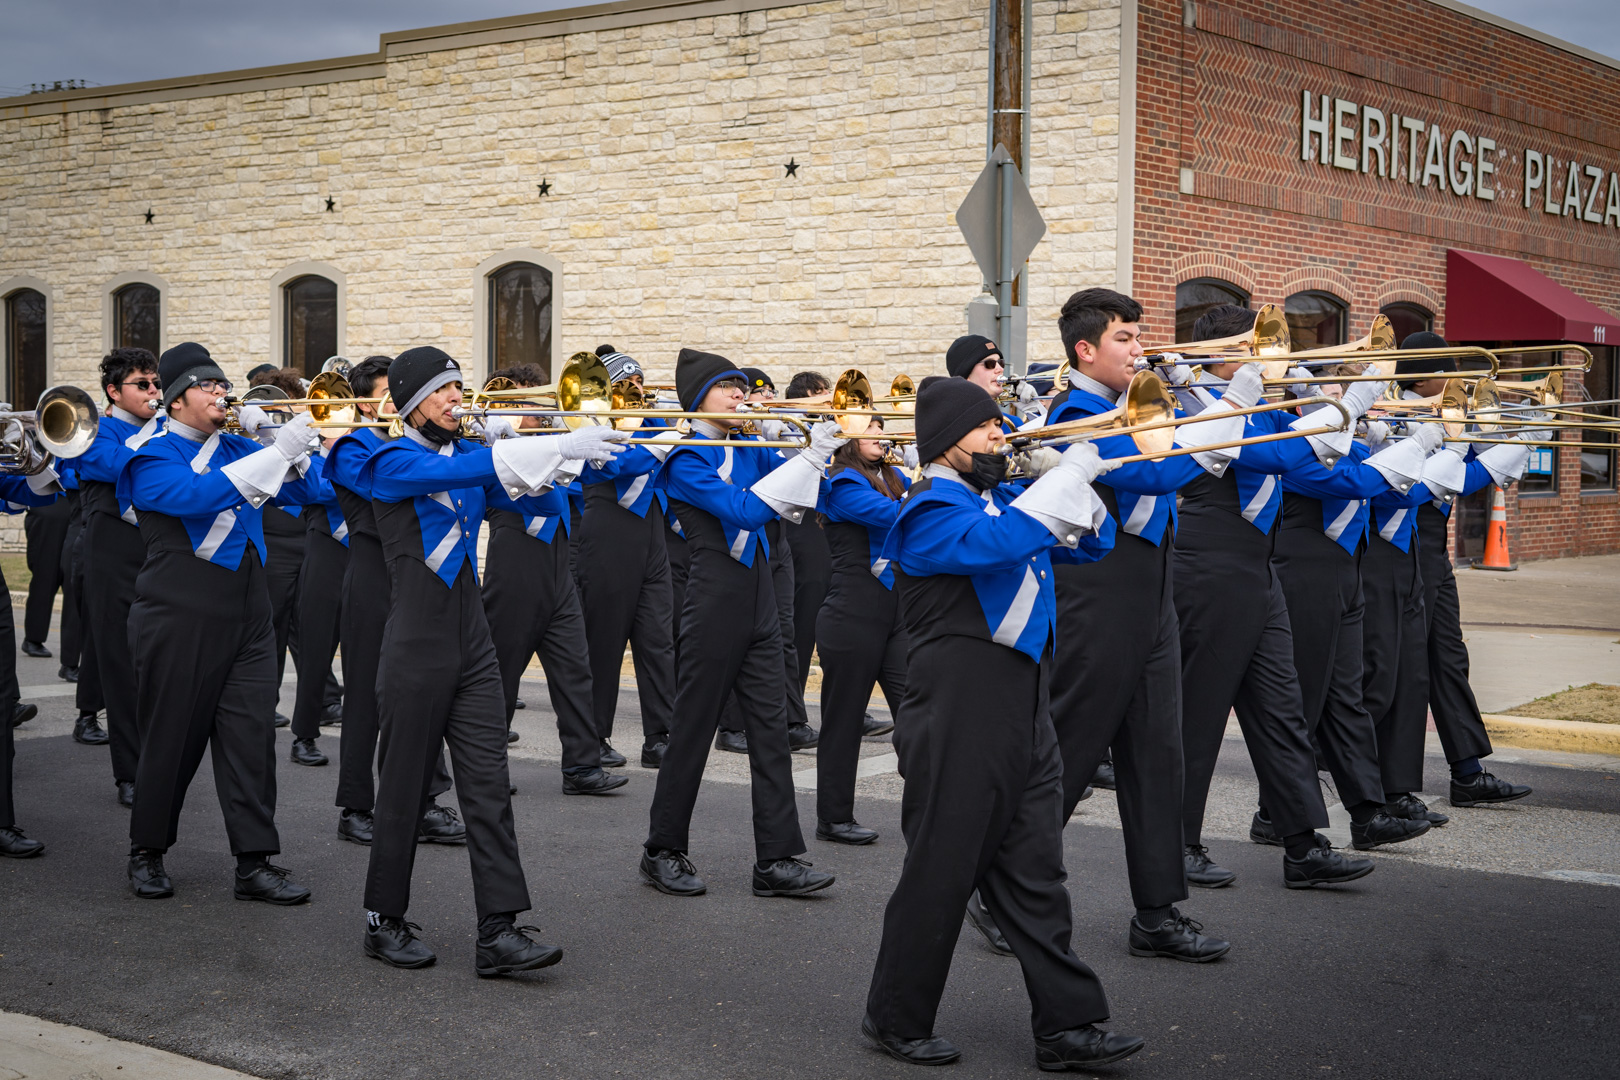 Marching band in blue and black.